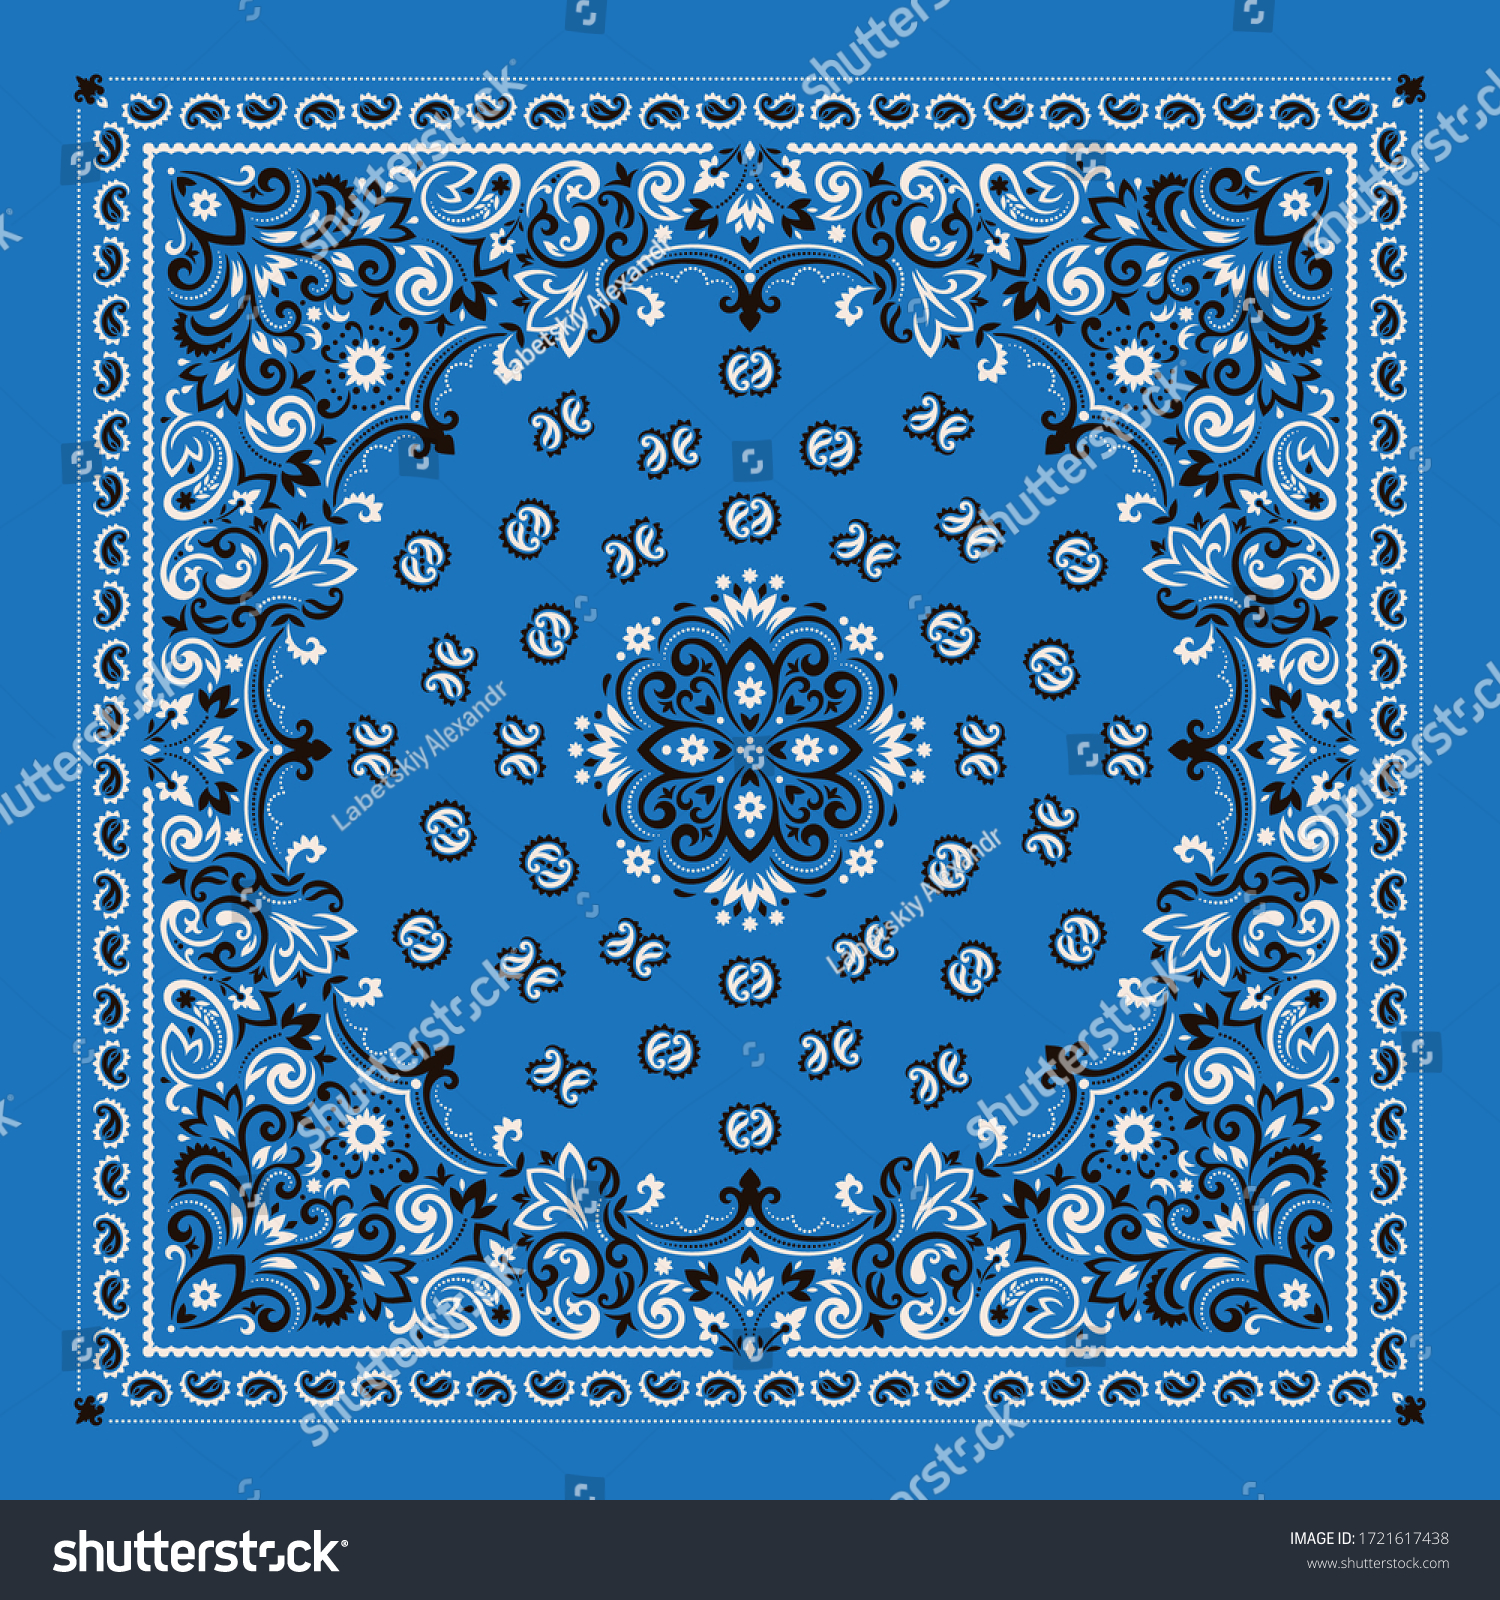 SVG of Vector ornament paisley Bandana Print. Silk neck scarf or kerchief square pattern design style, best motive for print on fabric or papper. svg